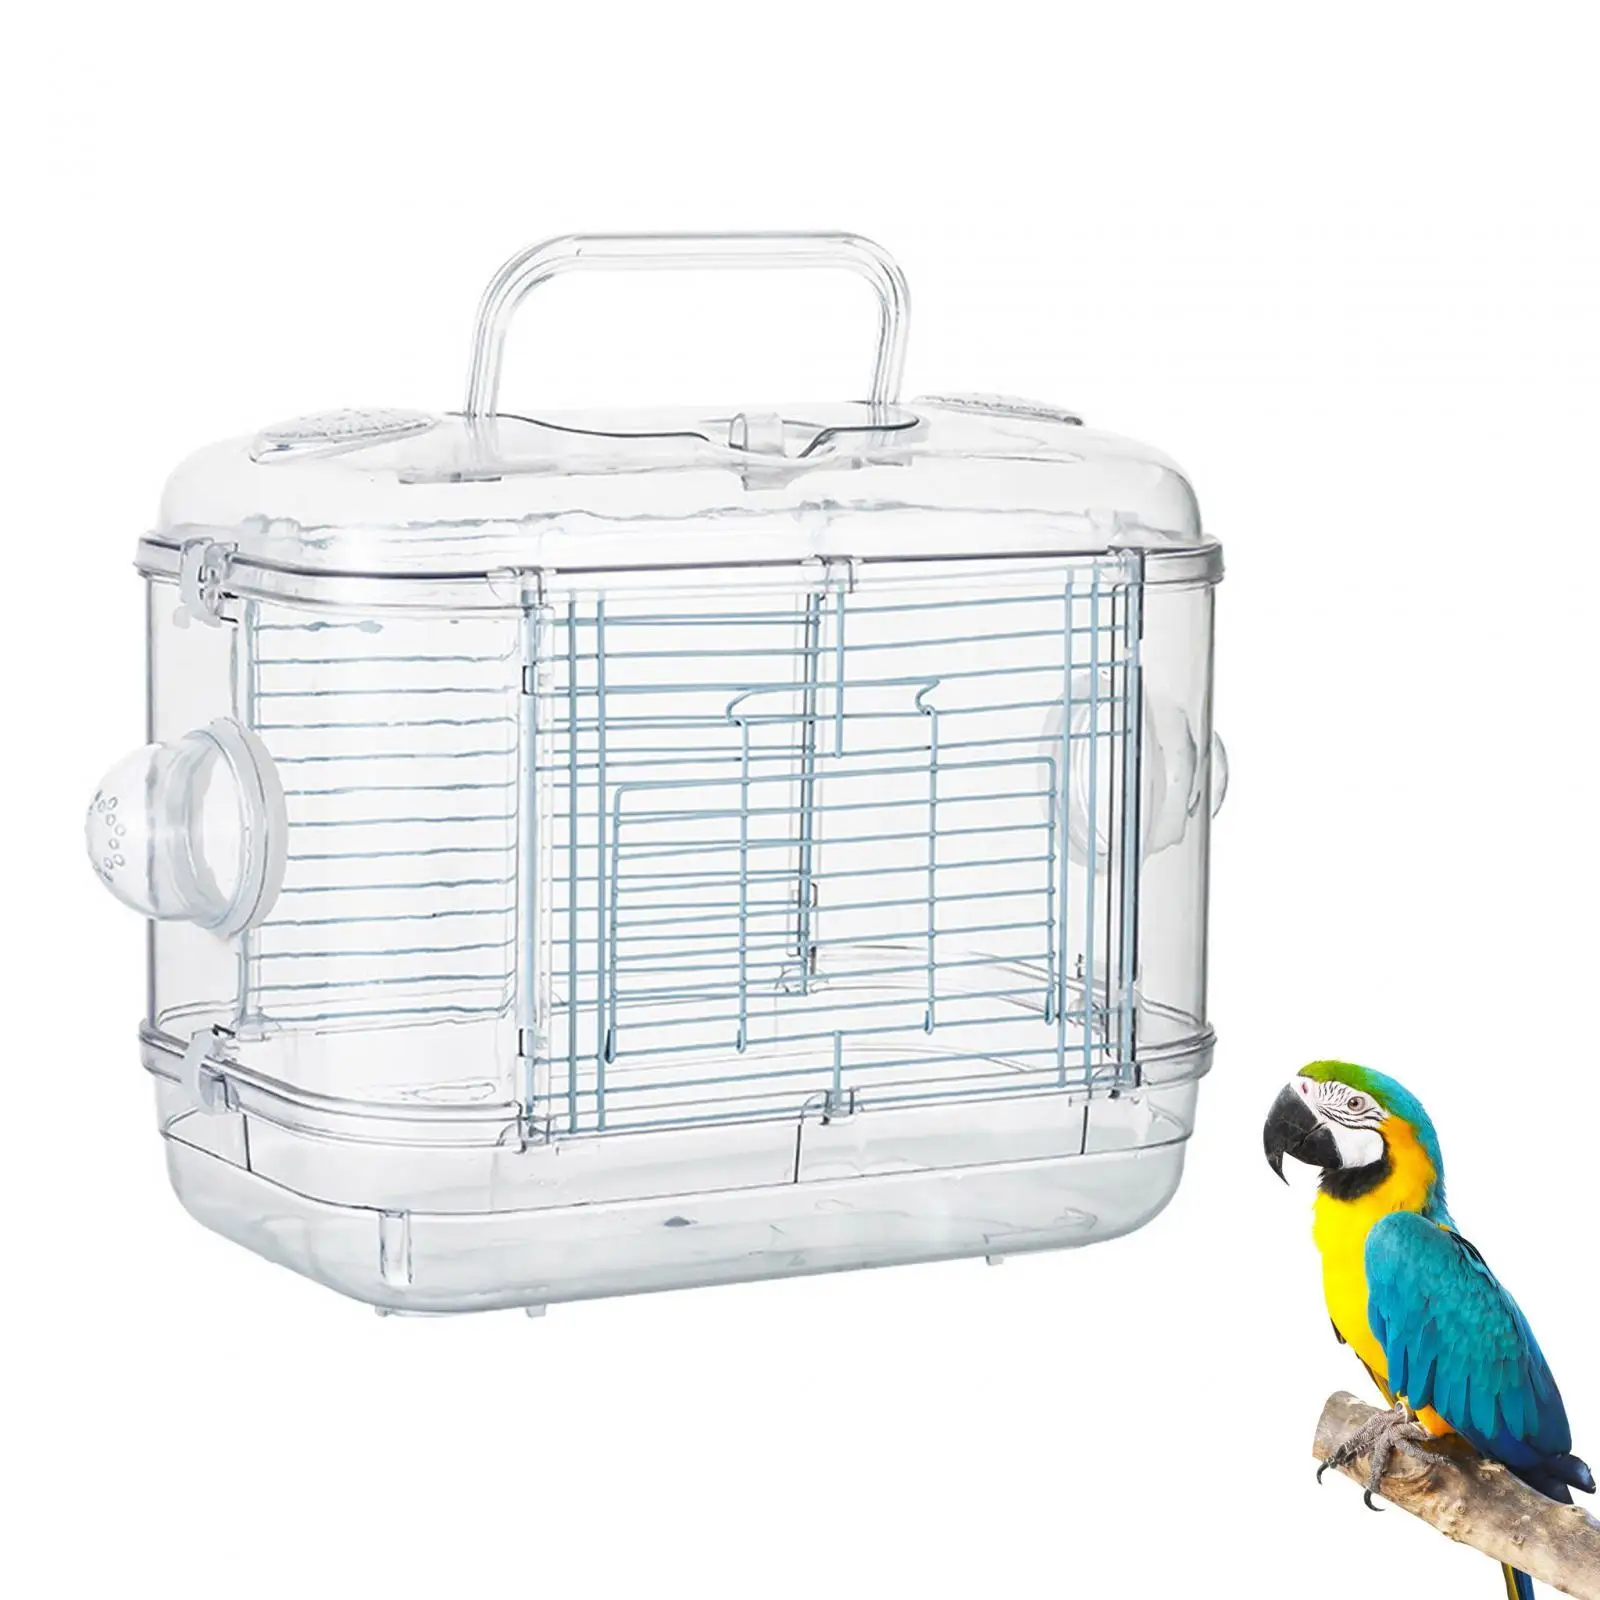 Acrylic Villa Bird Cage with Stand Lightweight Bird Carrier Bird Travel Cage for Canary Small Birds Parrots Parakeets Cockatiels